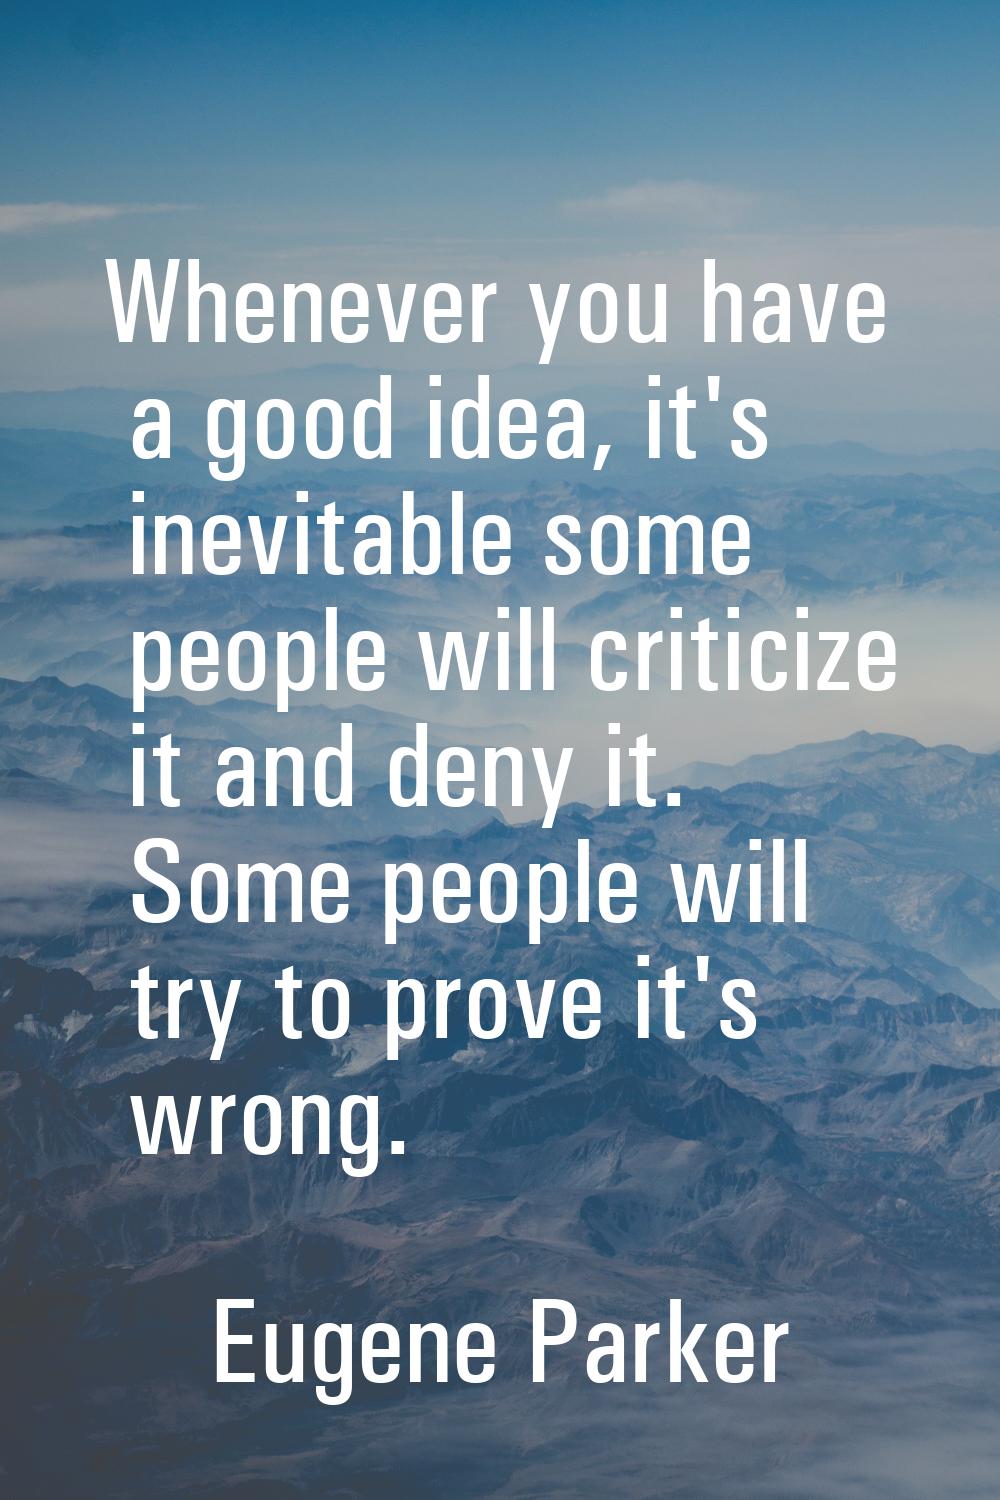 Whenever you have a good idea, it's inevitable some people will criticize it and deny it. Some peop